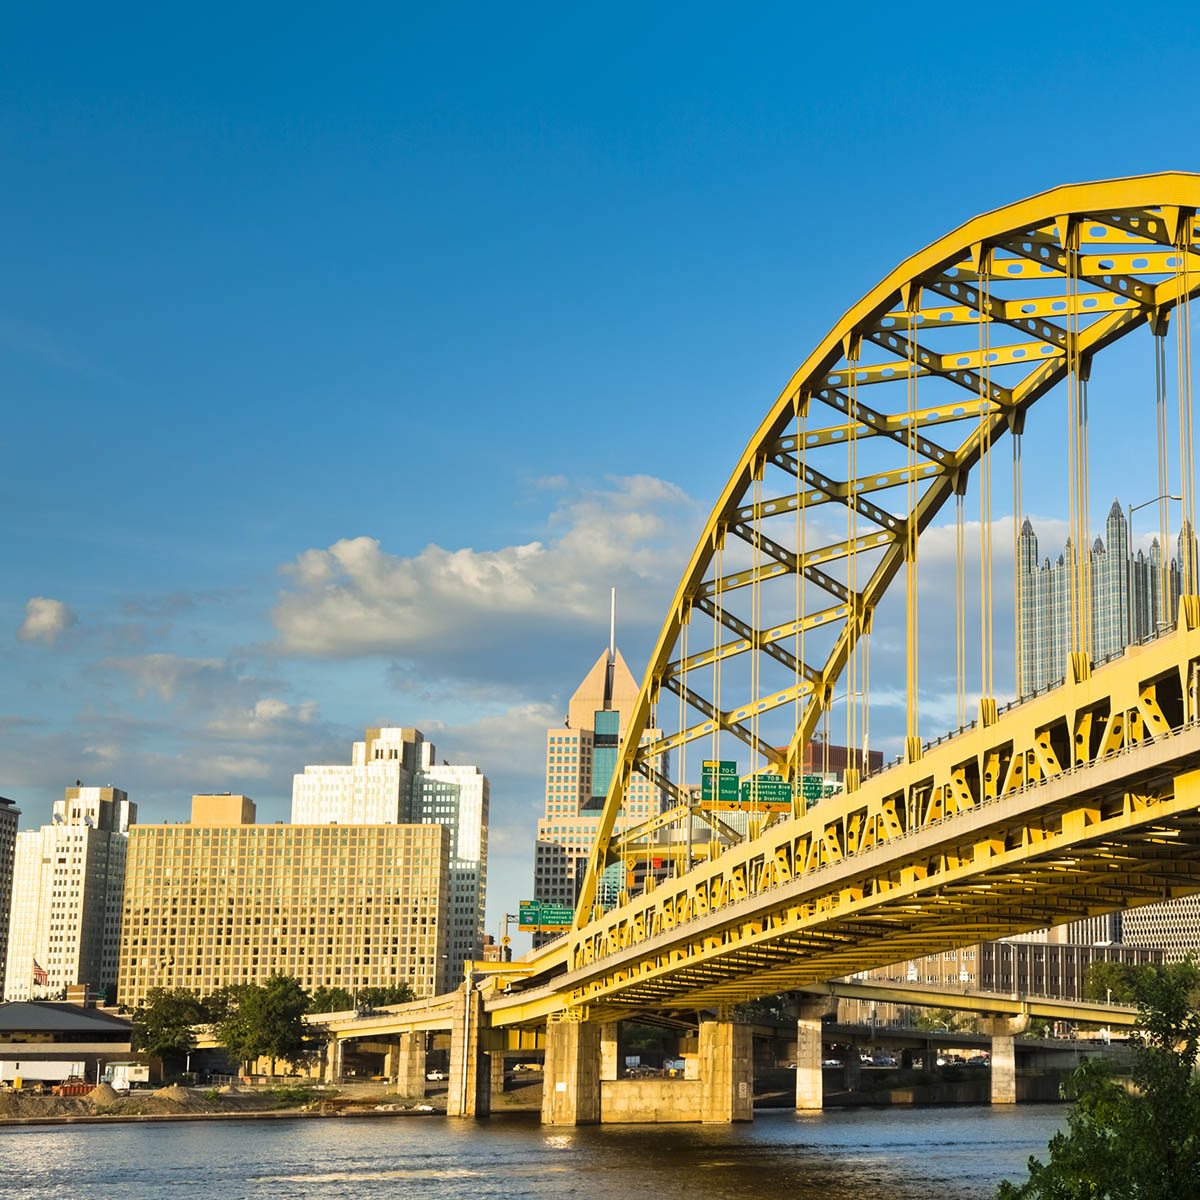 Photo of a yellow bridge over a river and the Pittsburgh skyline